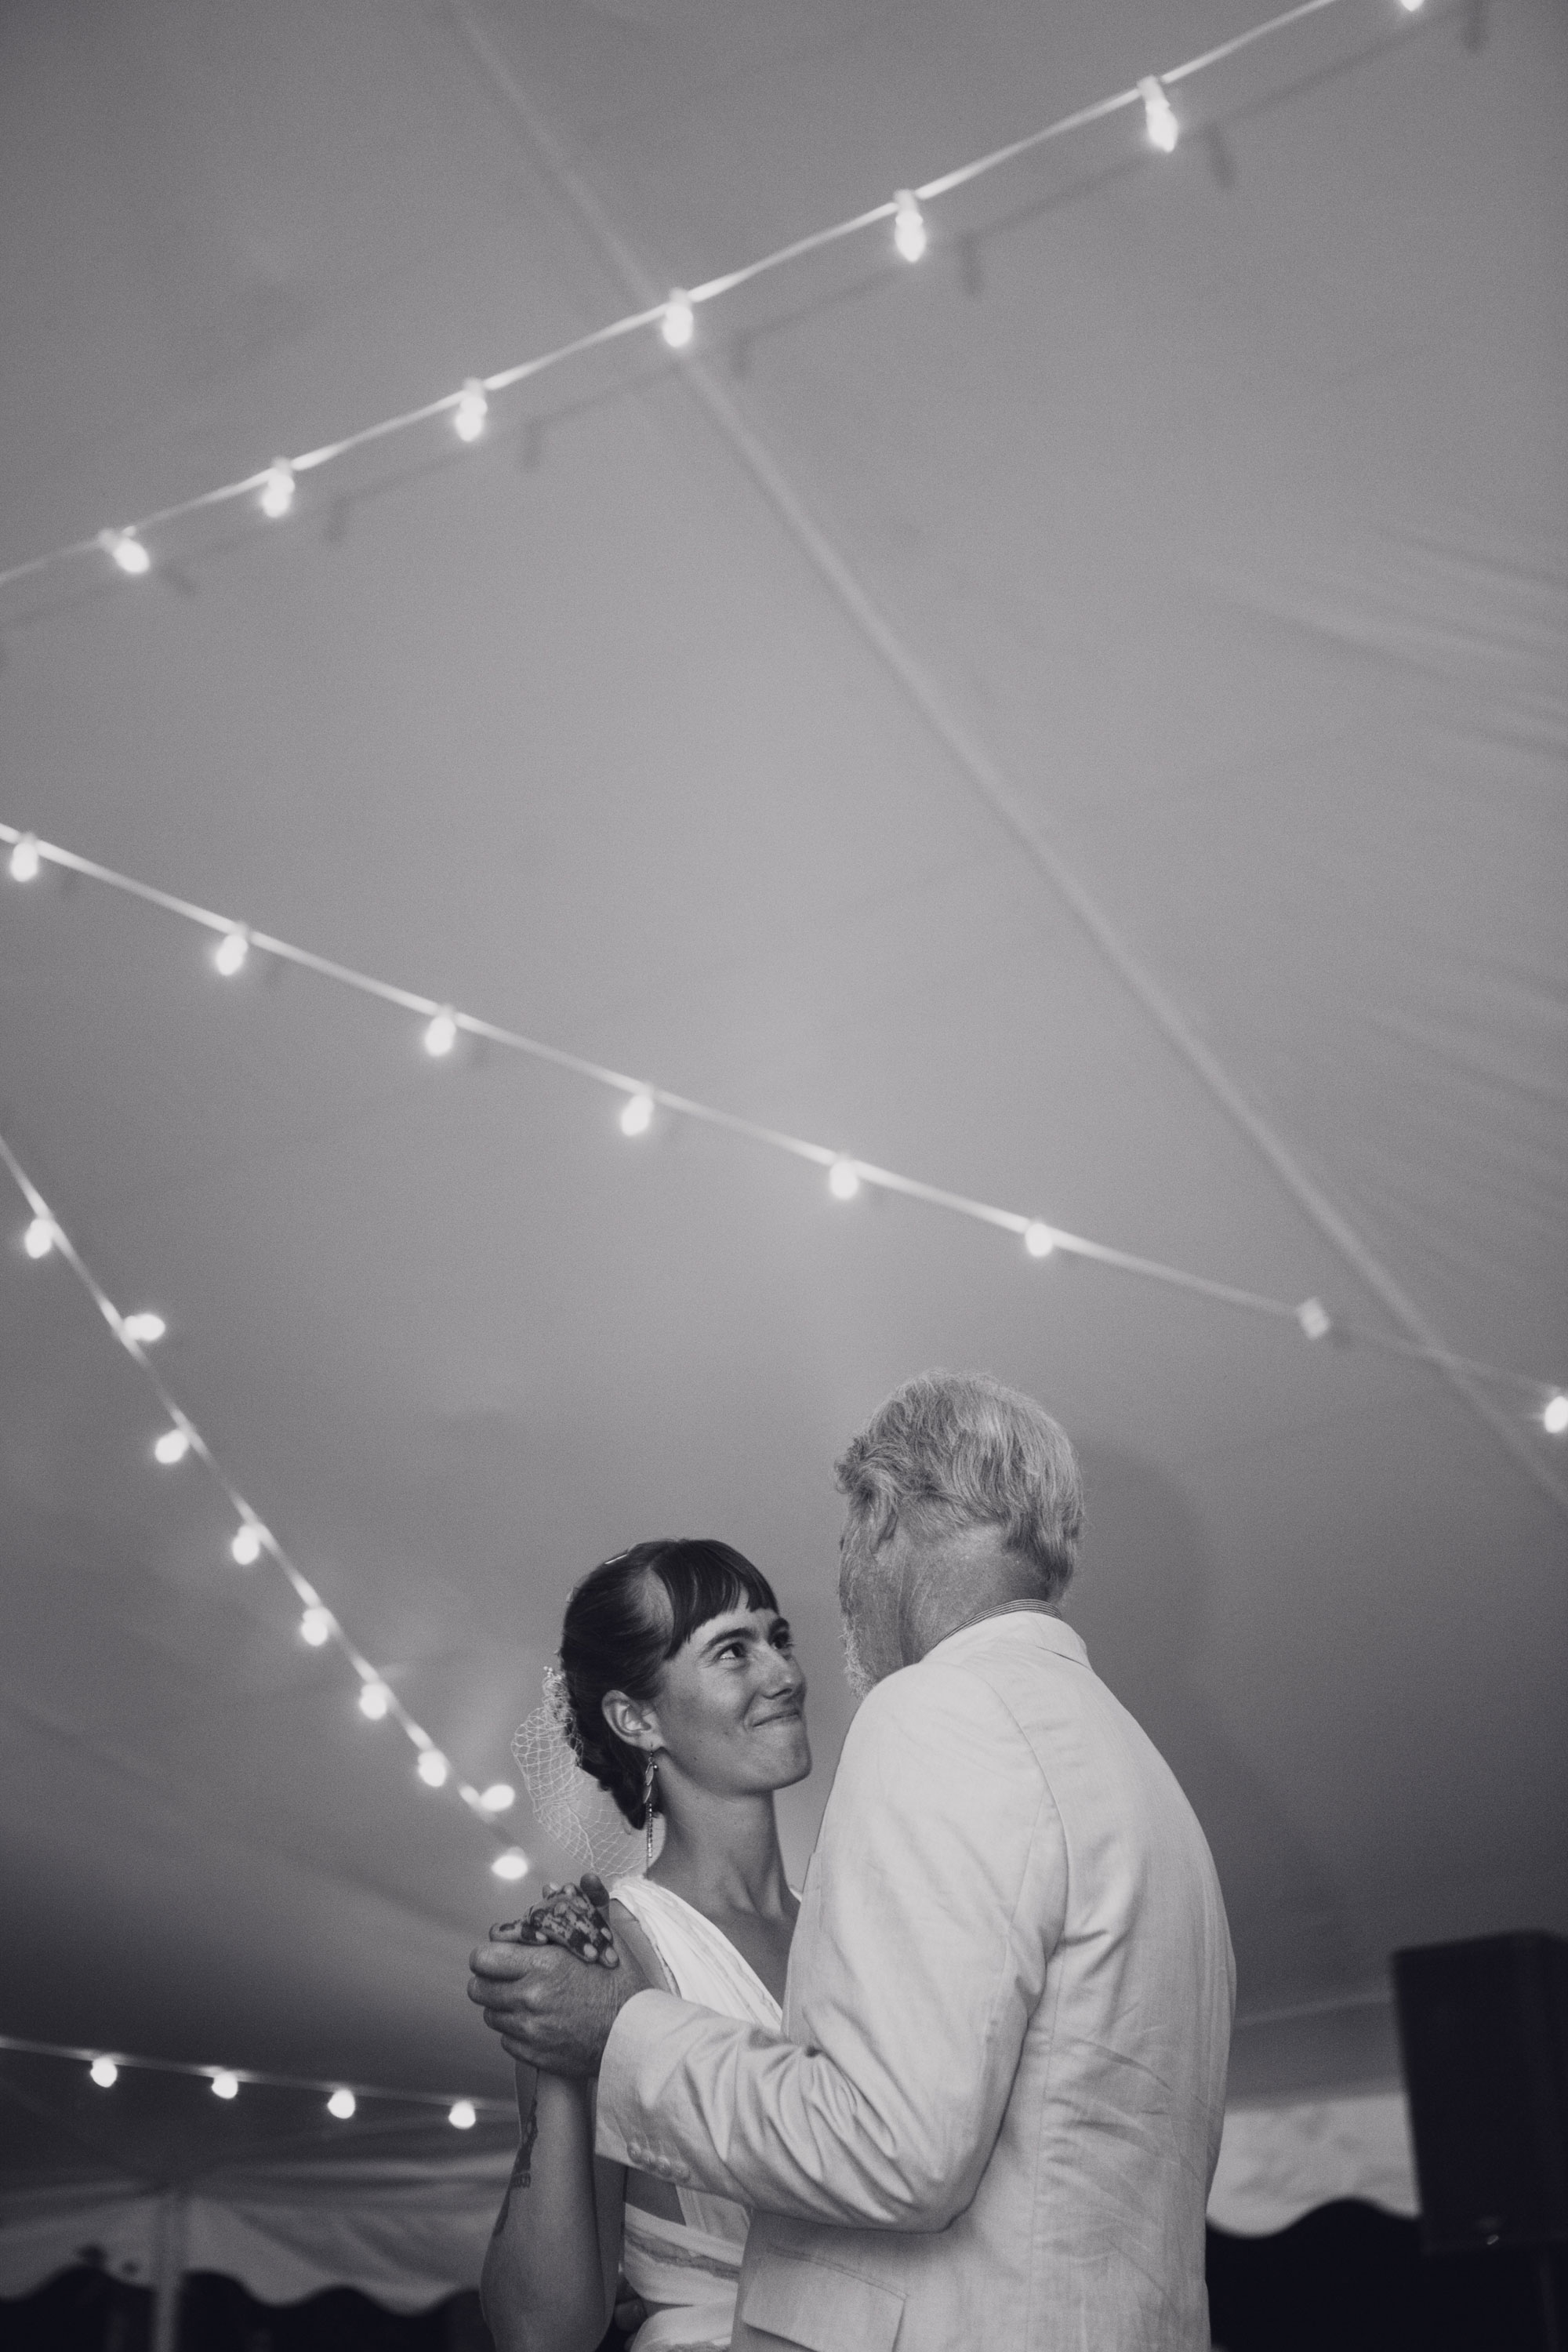 Father daughter dance at a wedding reception